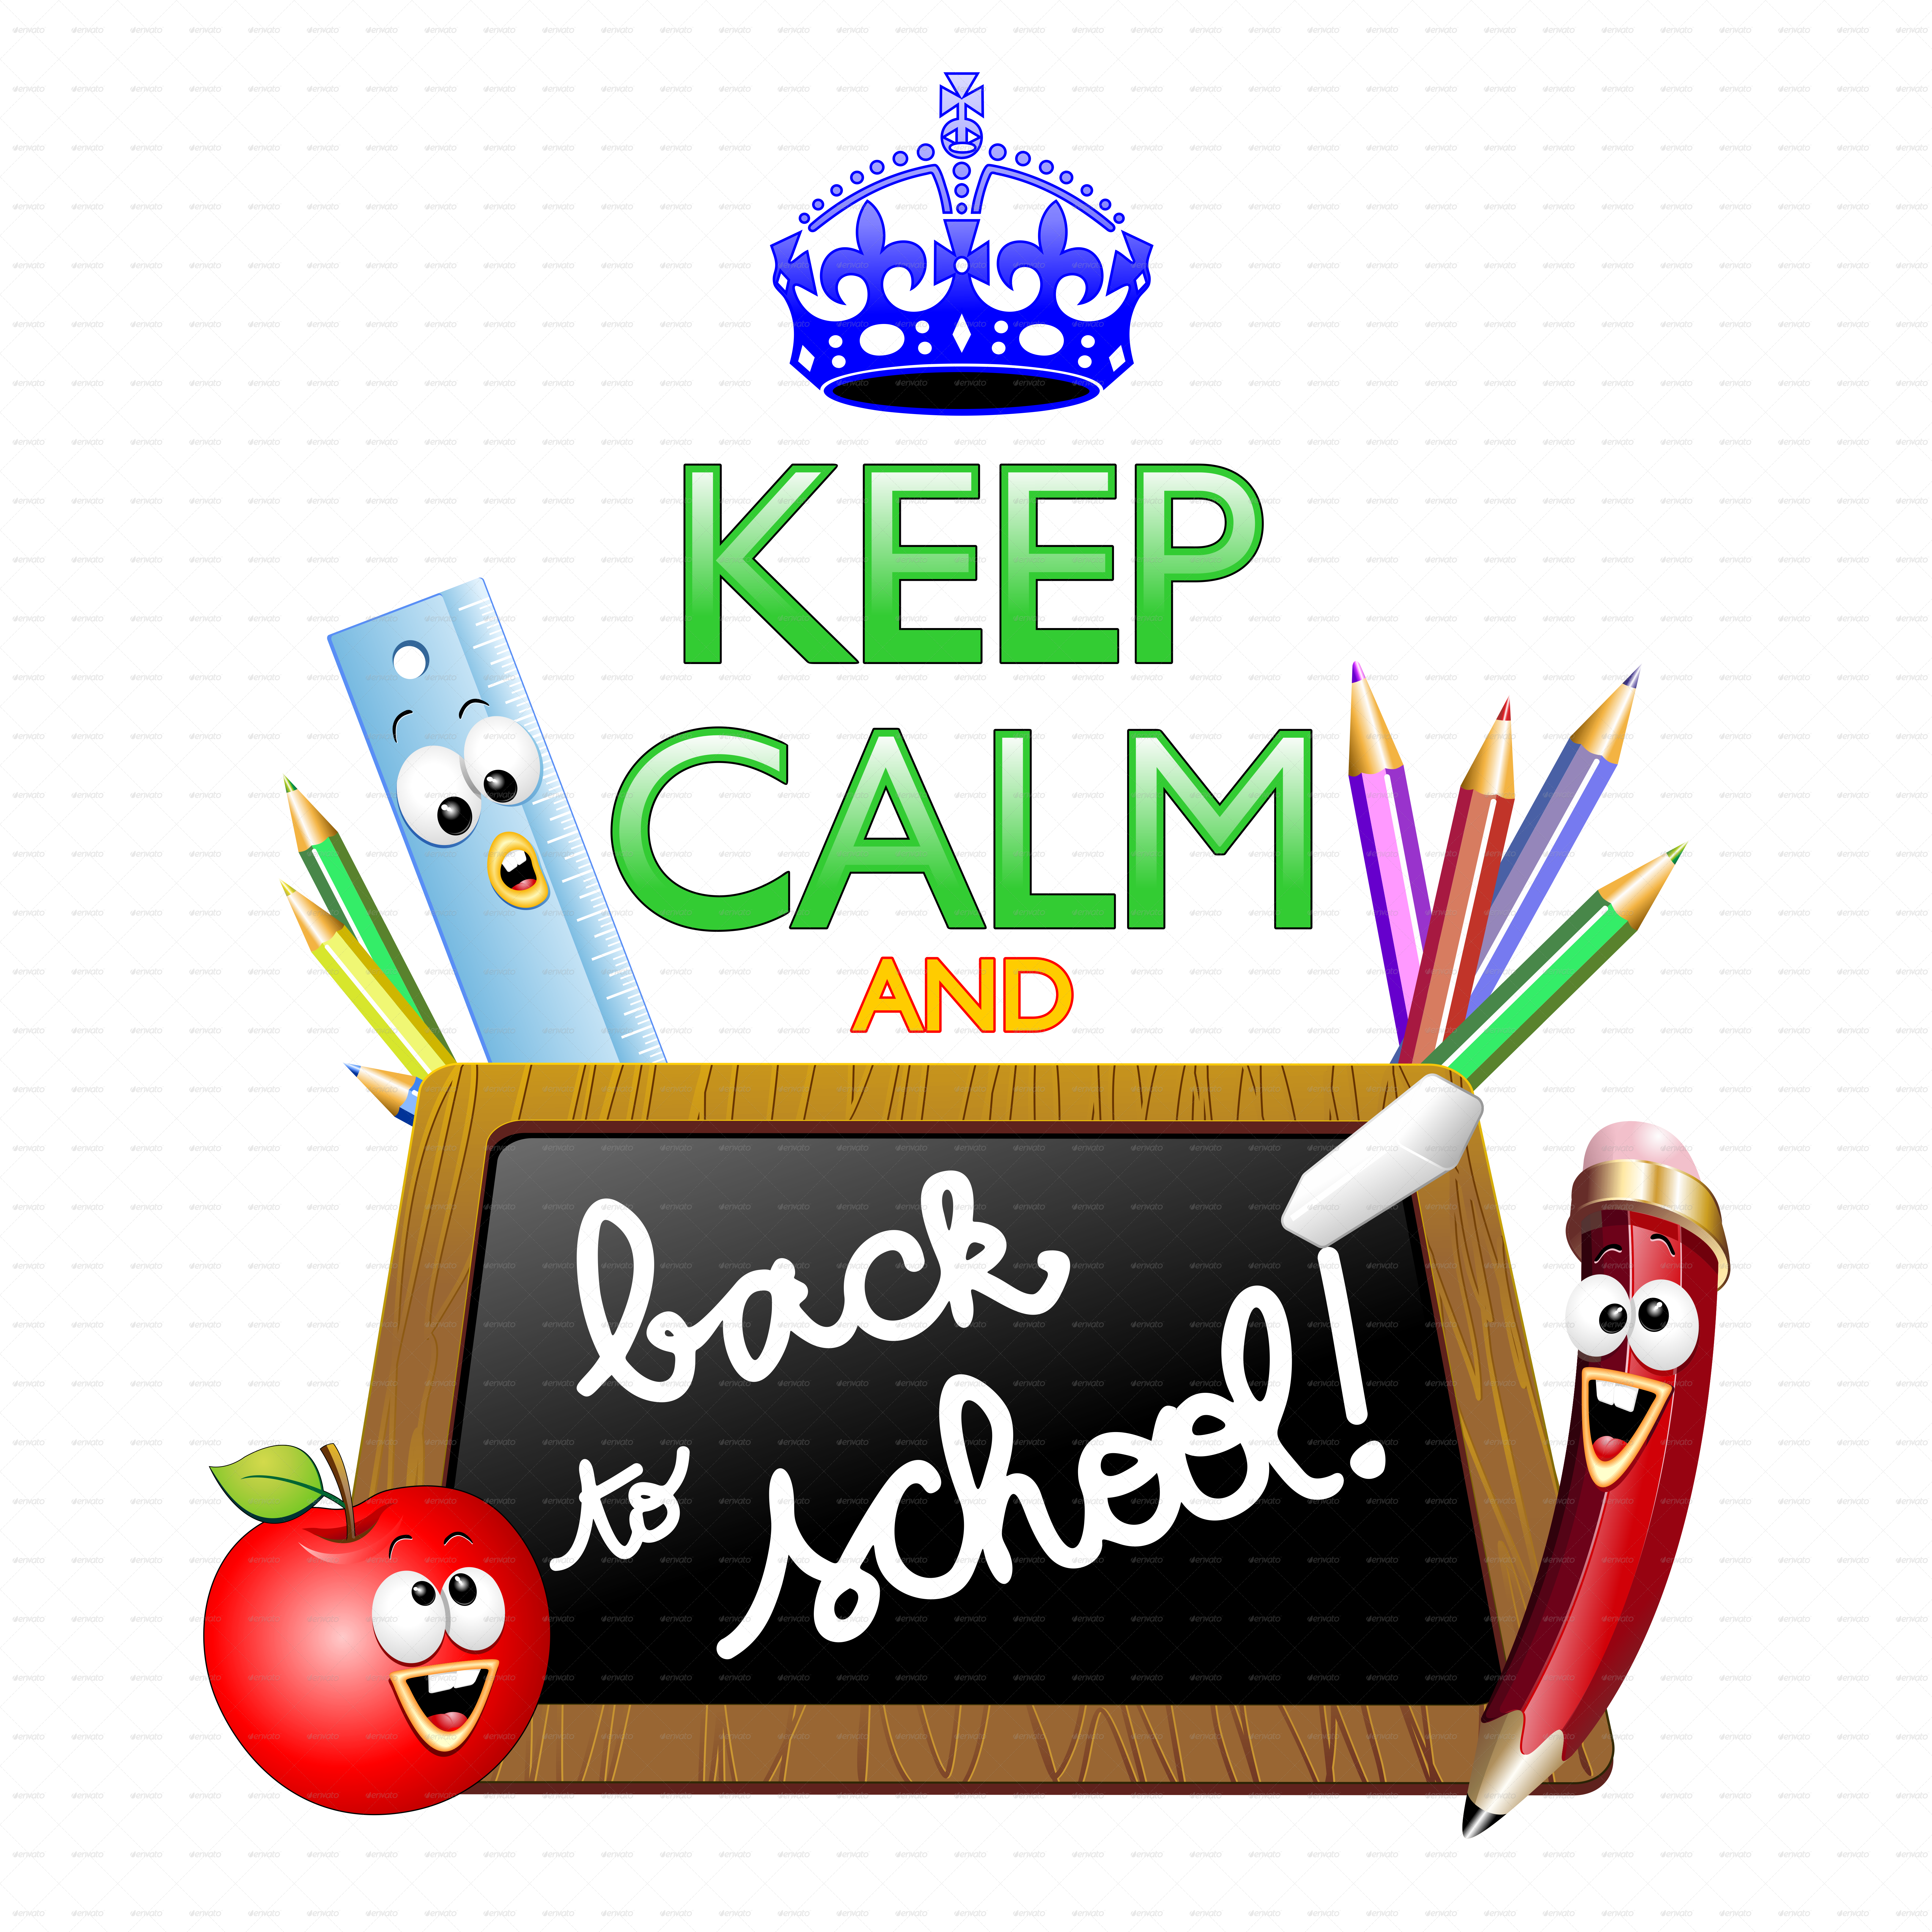 Keep Calm And Back To School - Your Courage Cheerfulness Resolution Will Bring Us (6500x6500)